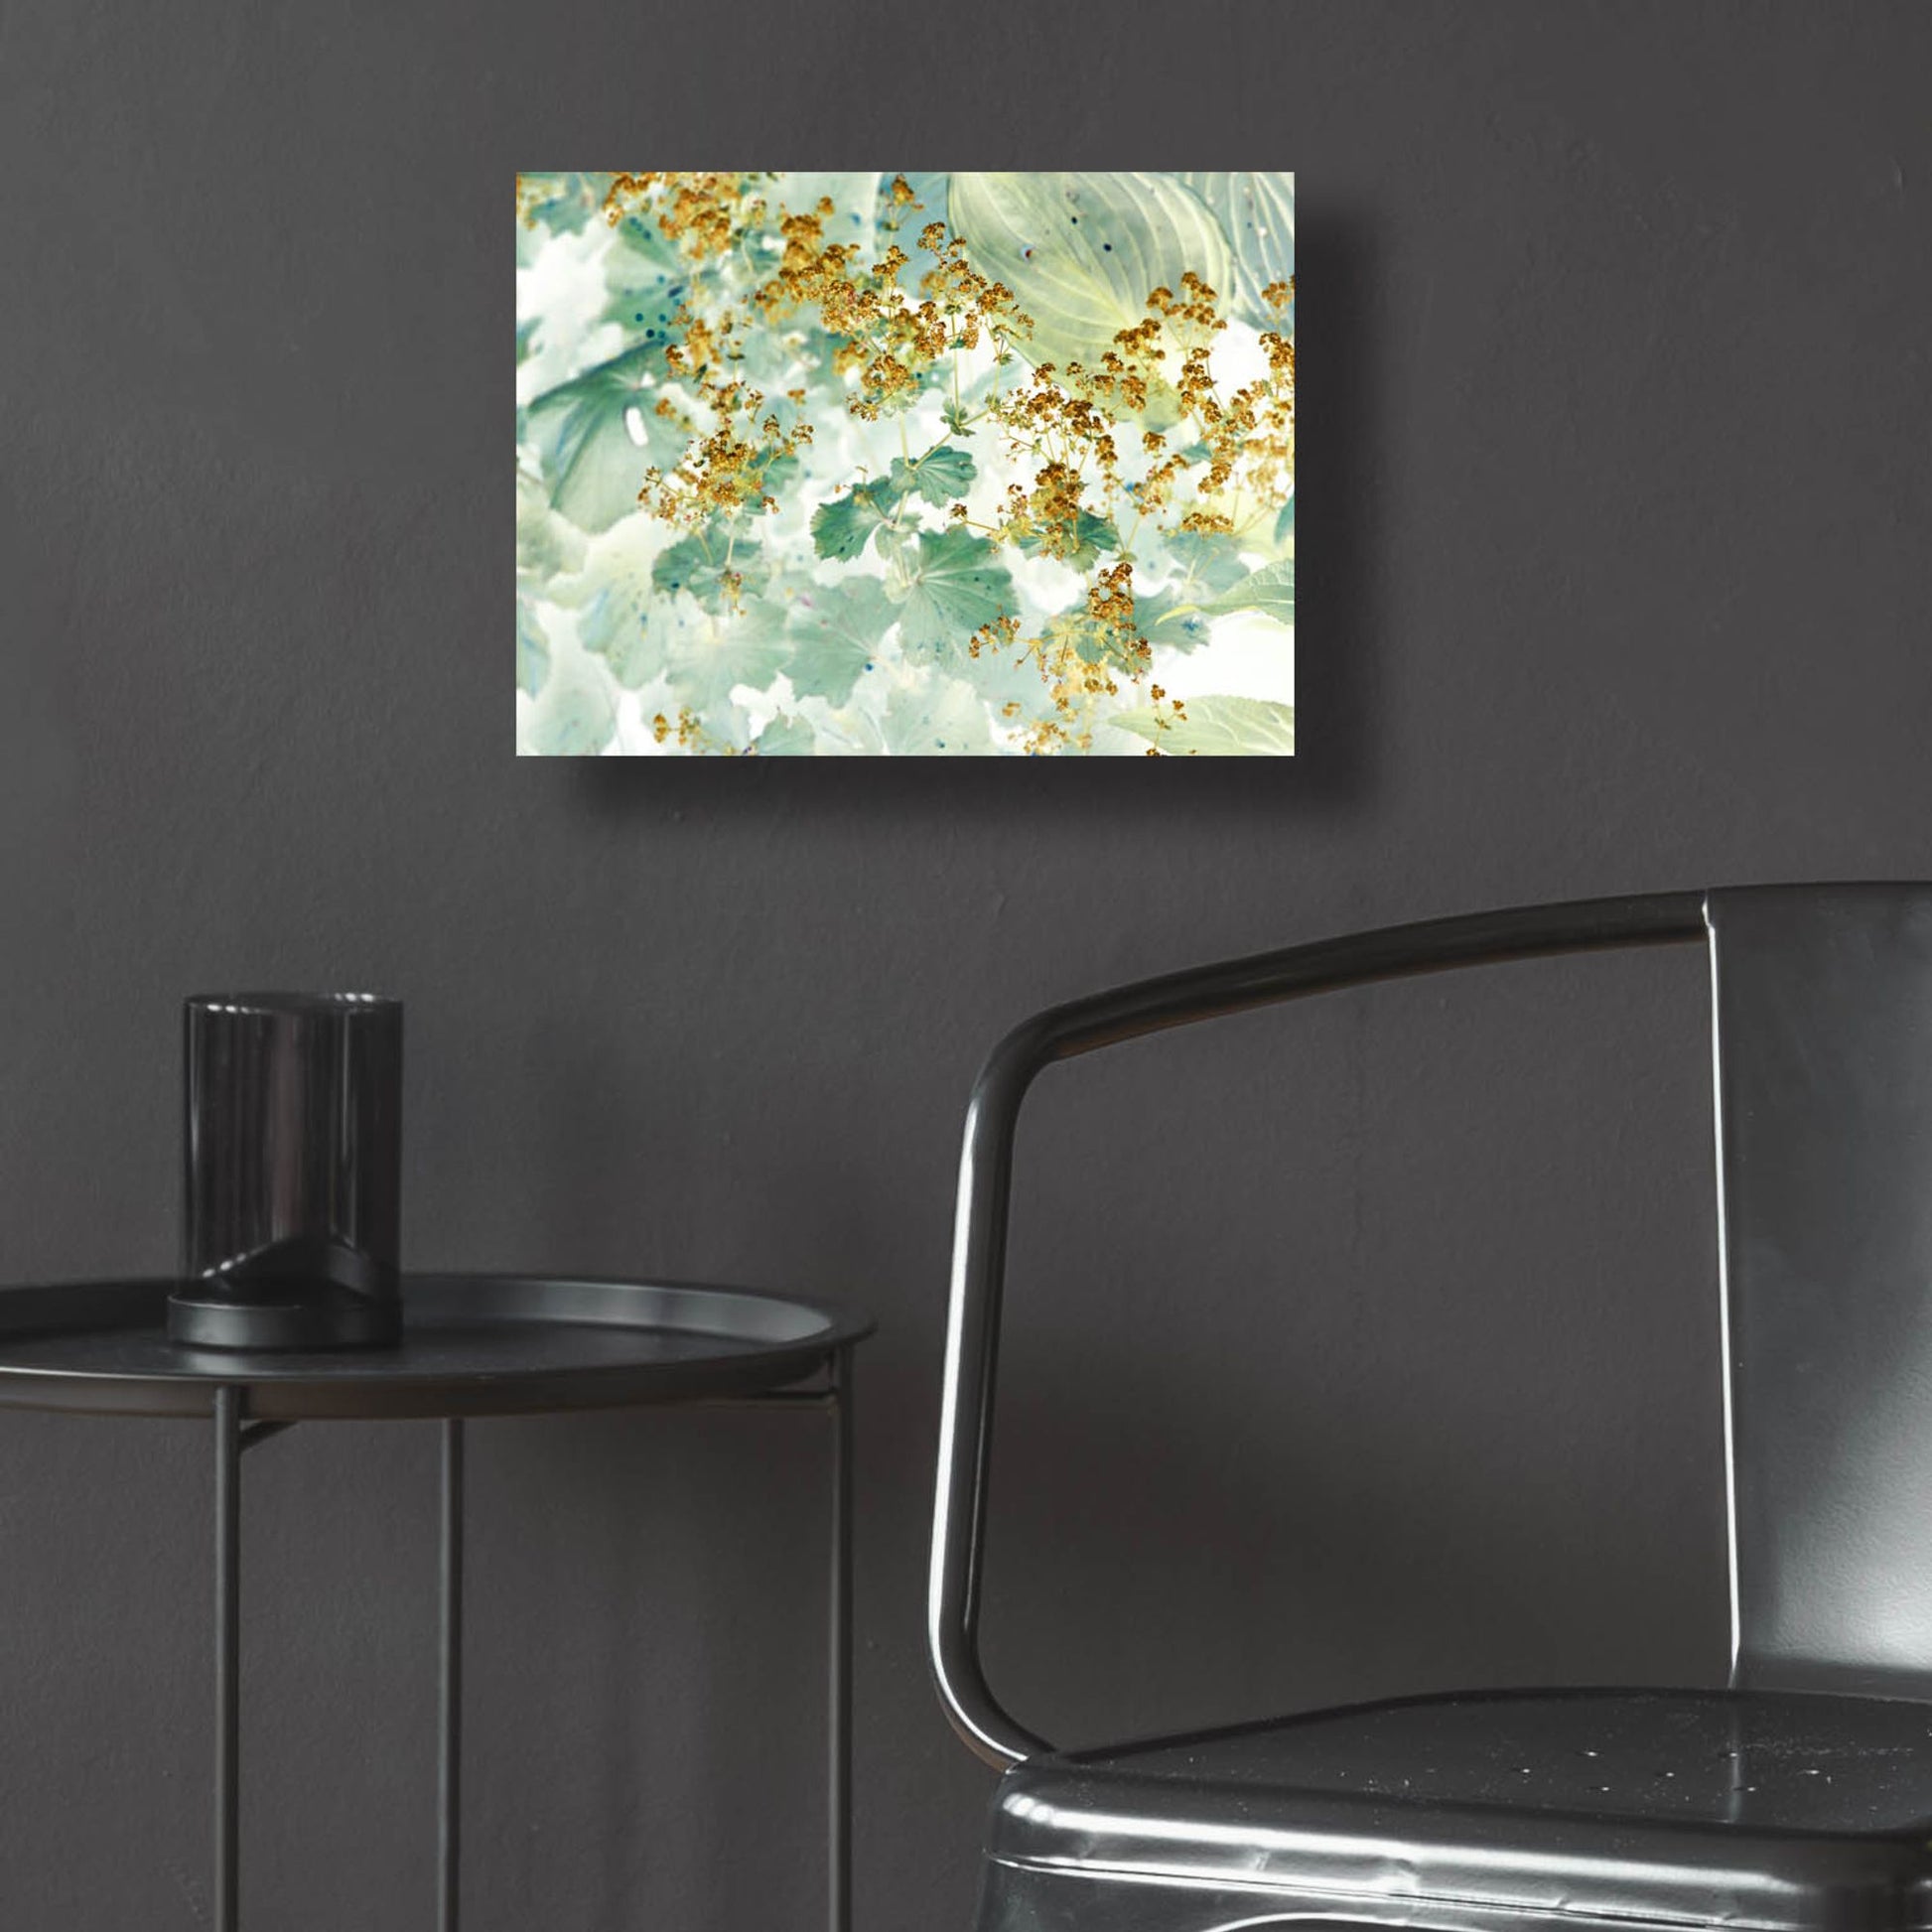 Epic Art ' Golden Lady's Mantle' by Judy Stalus, Acrylic Glass Wall Art,16x12